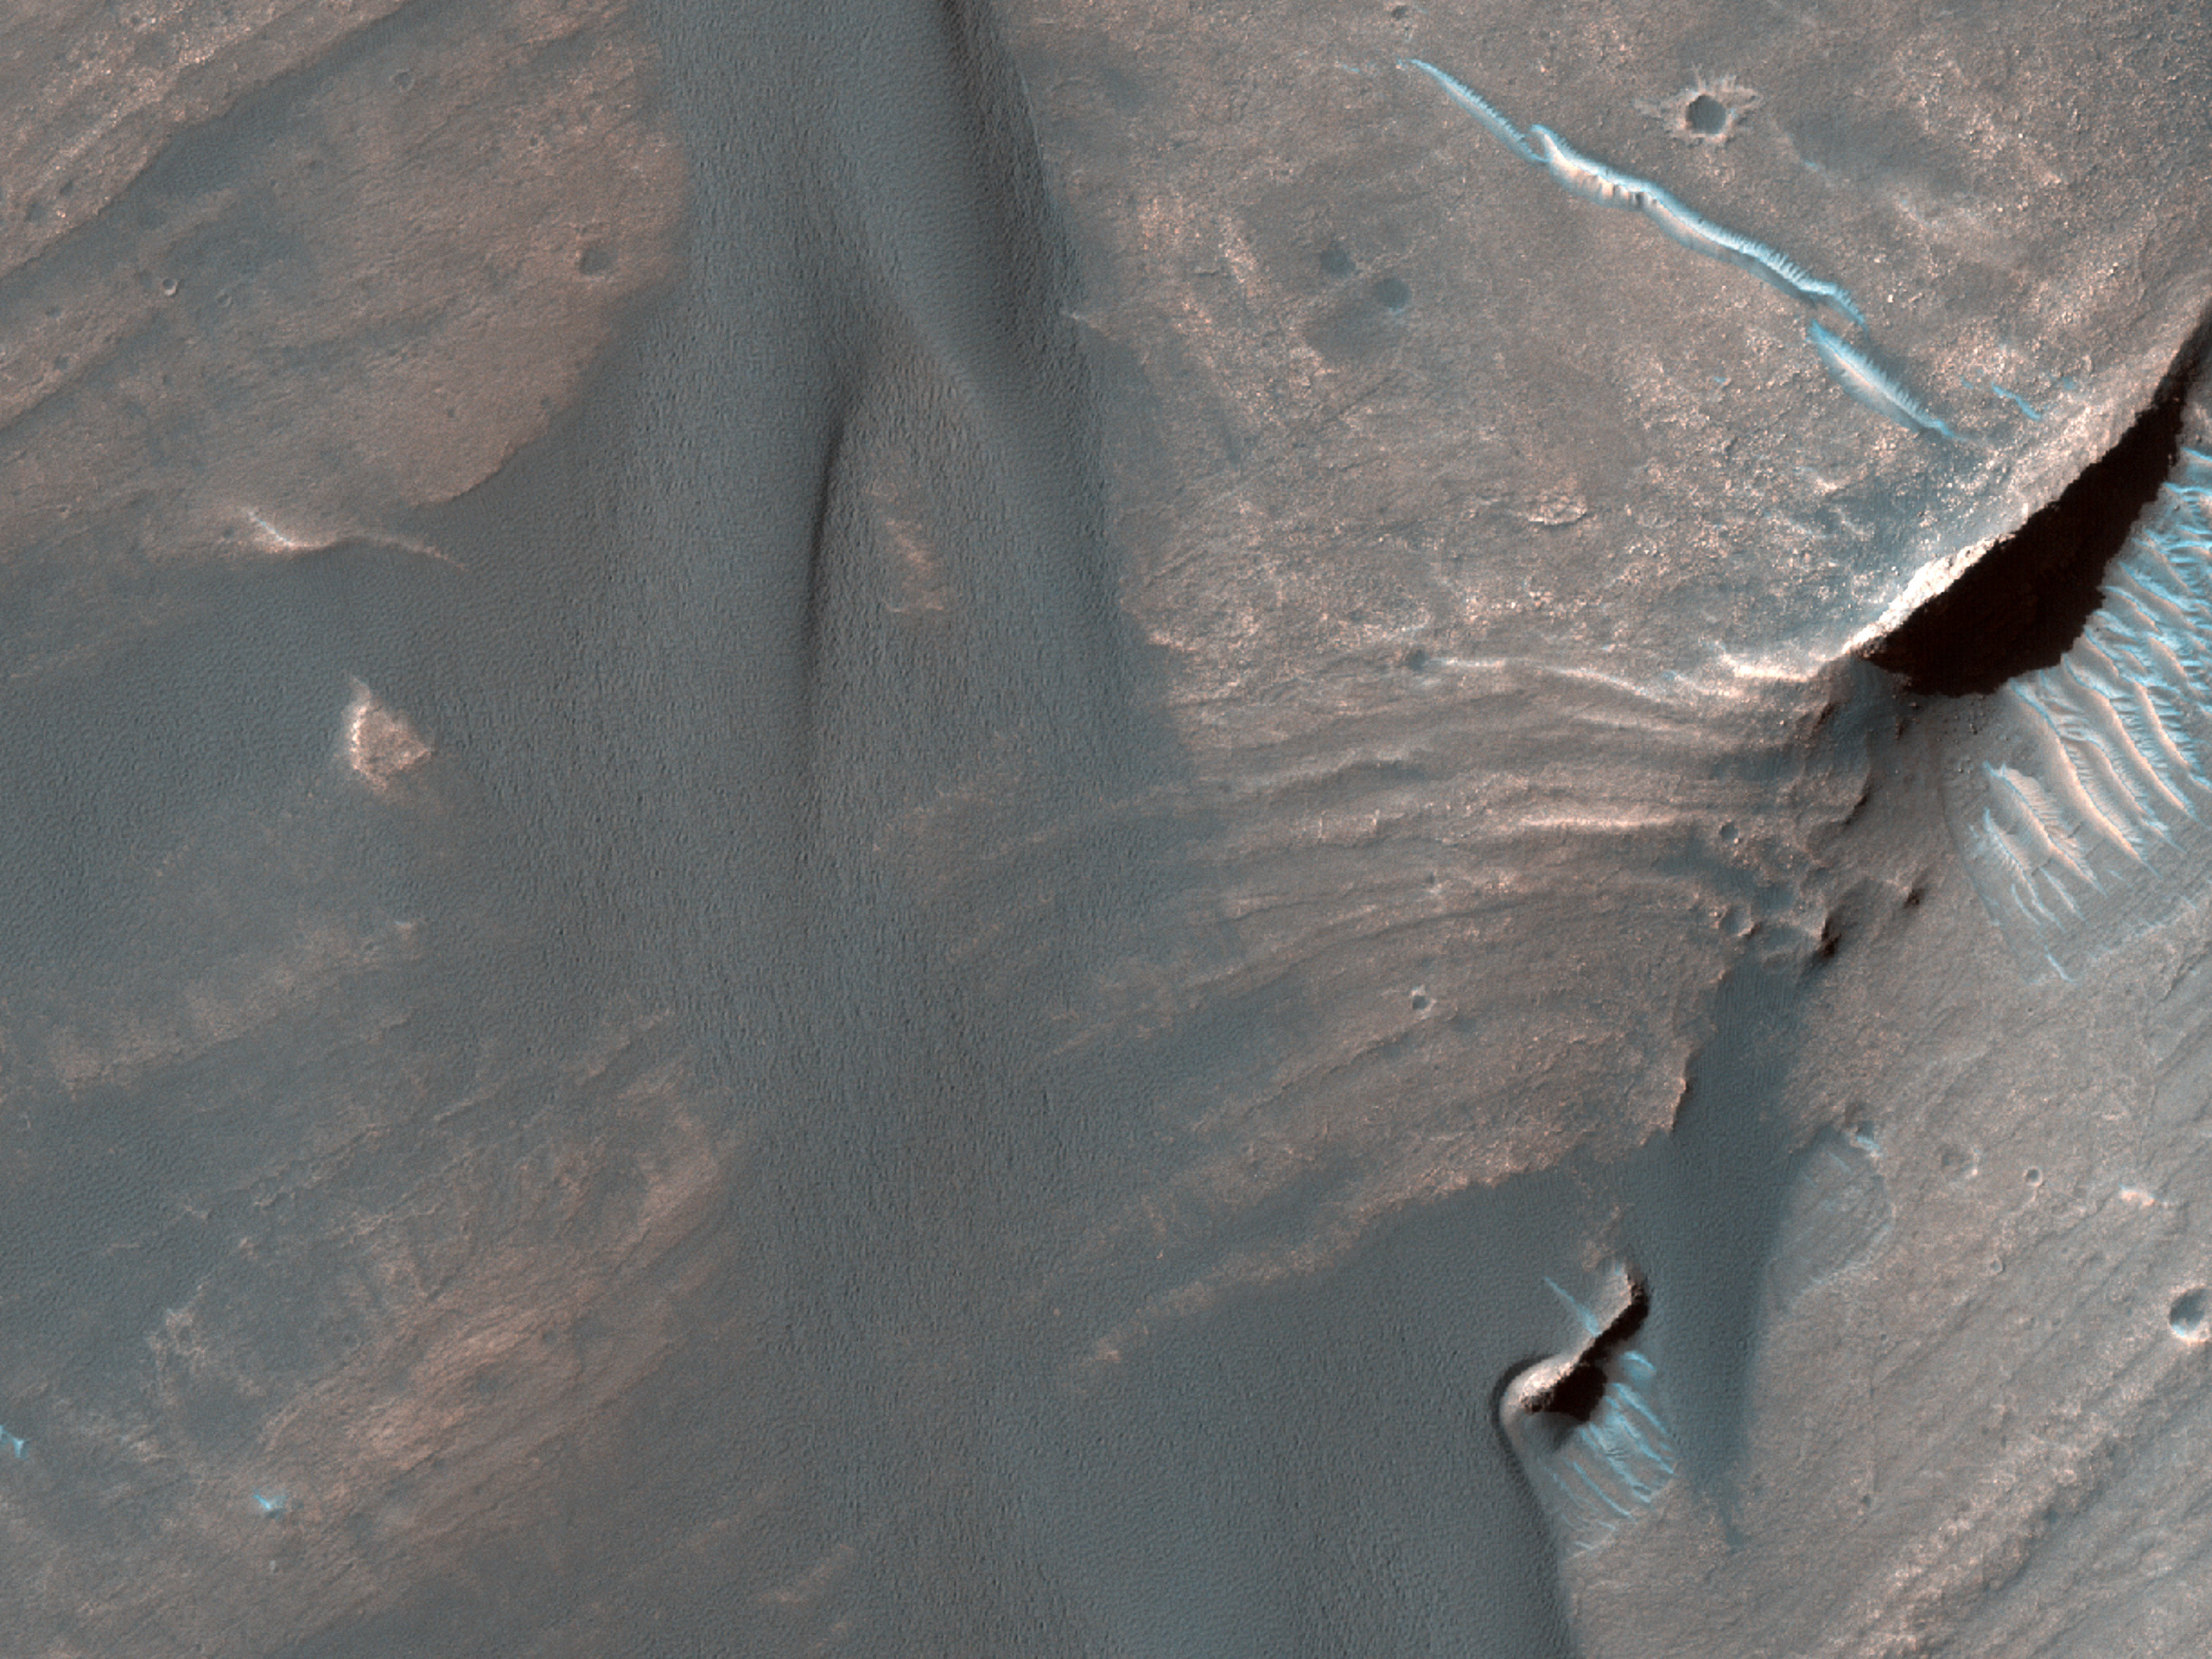 Dunes atop Layered Material in Capen Crater